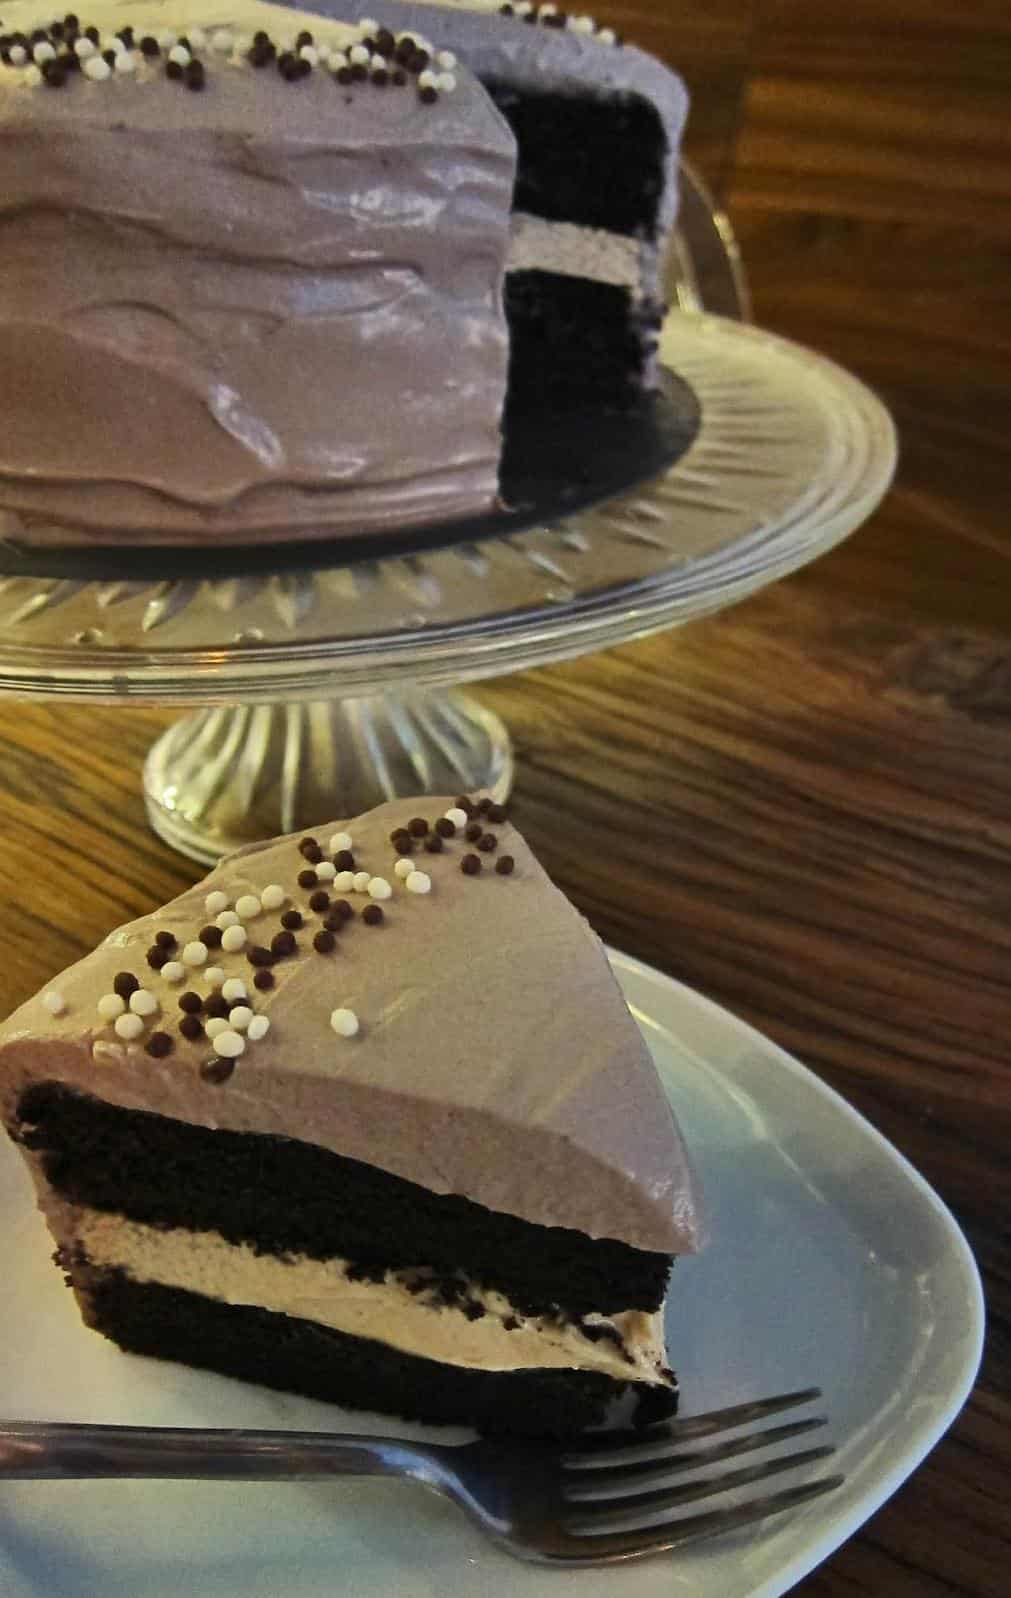  You don't have to be a master baker to create this delicious masterpiece.